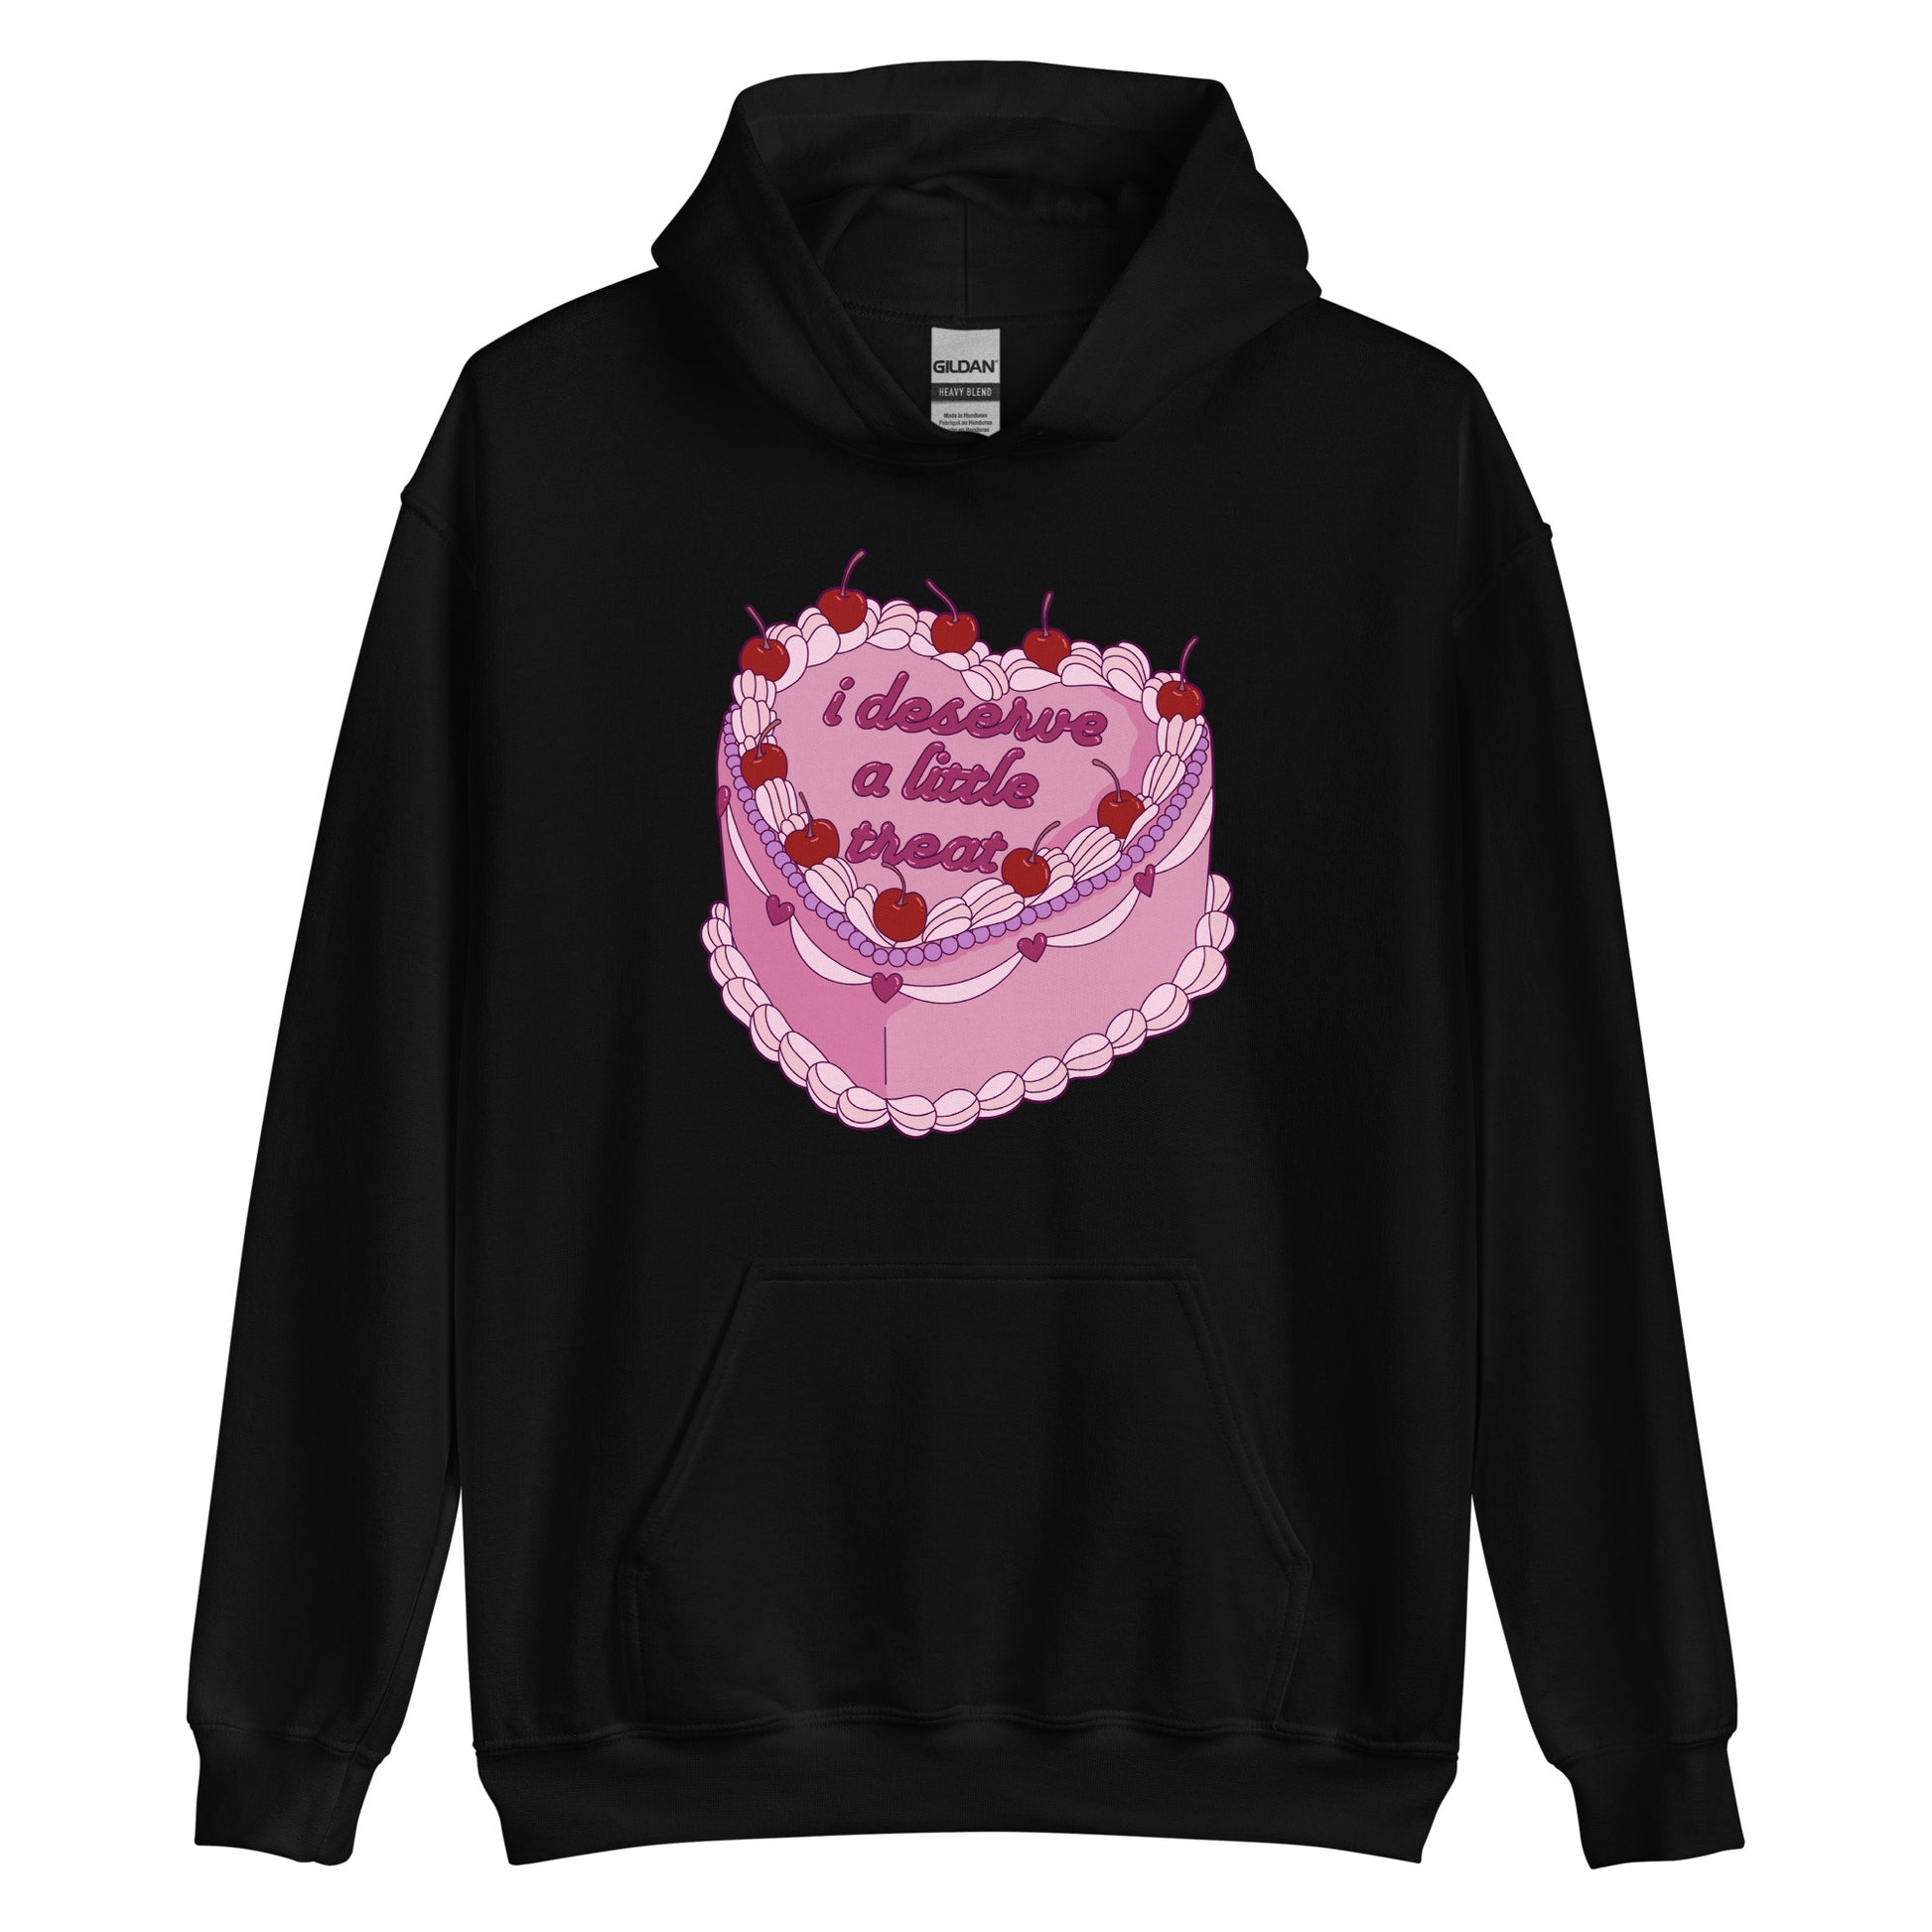 A black hooded sweatshirt featuring an illustration of an elaborately decorated pink cake. Icing on the cake reads "i deserve a little treat" in a cursive font.